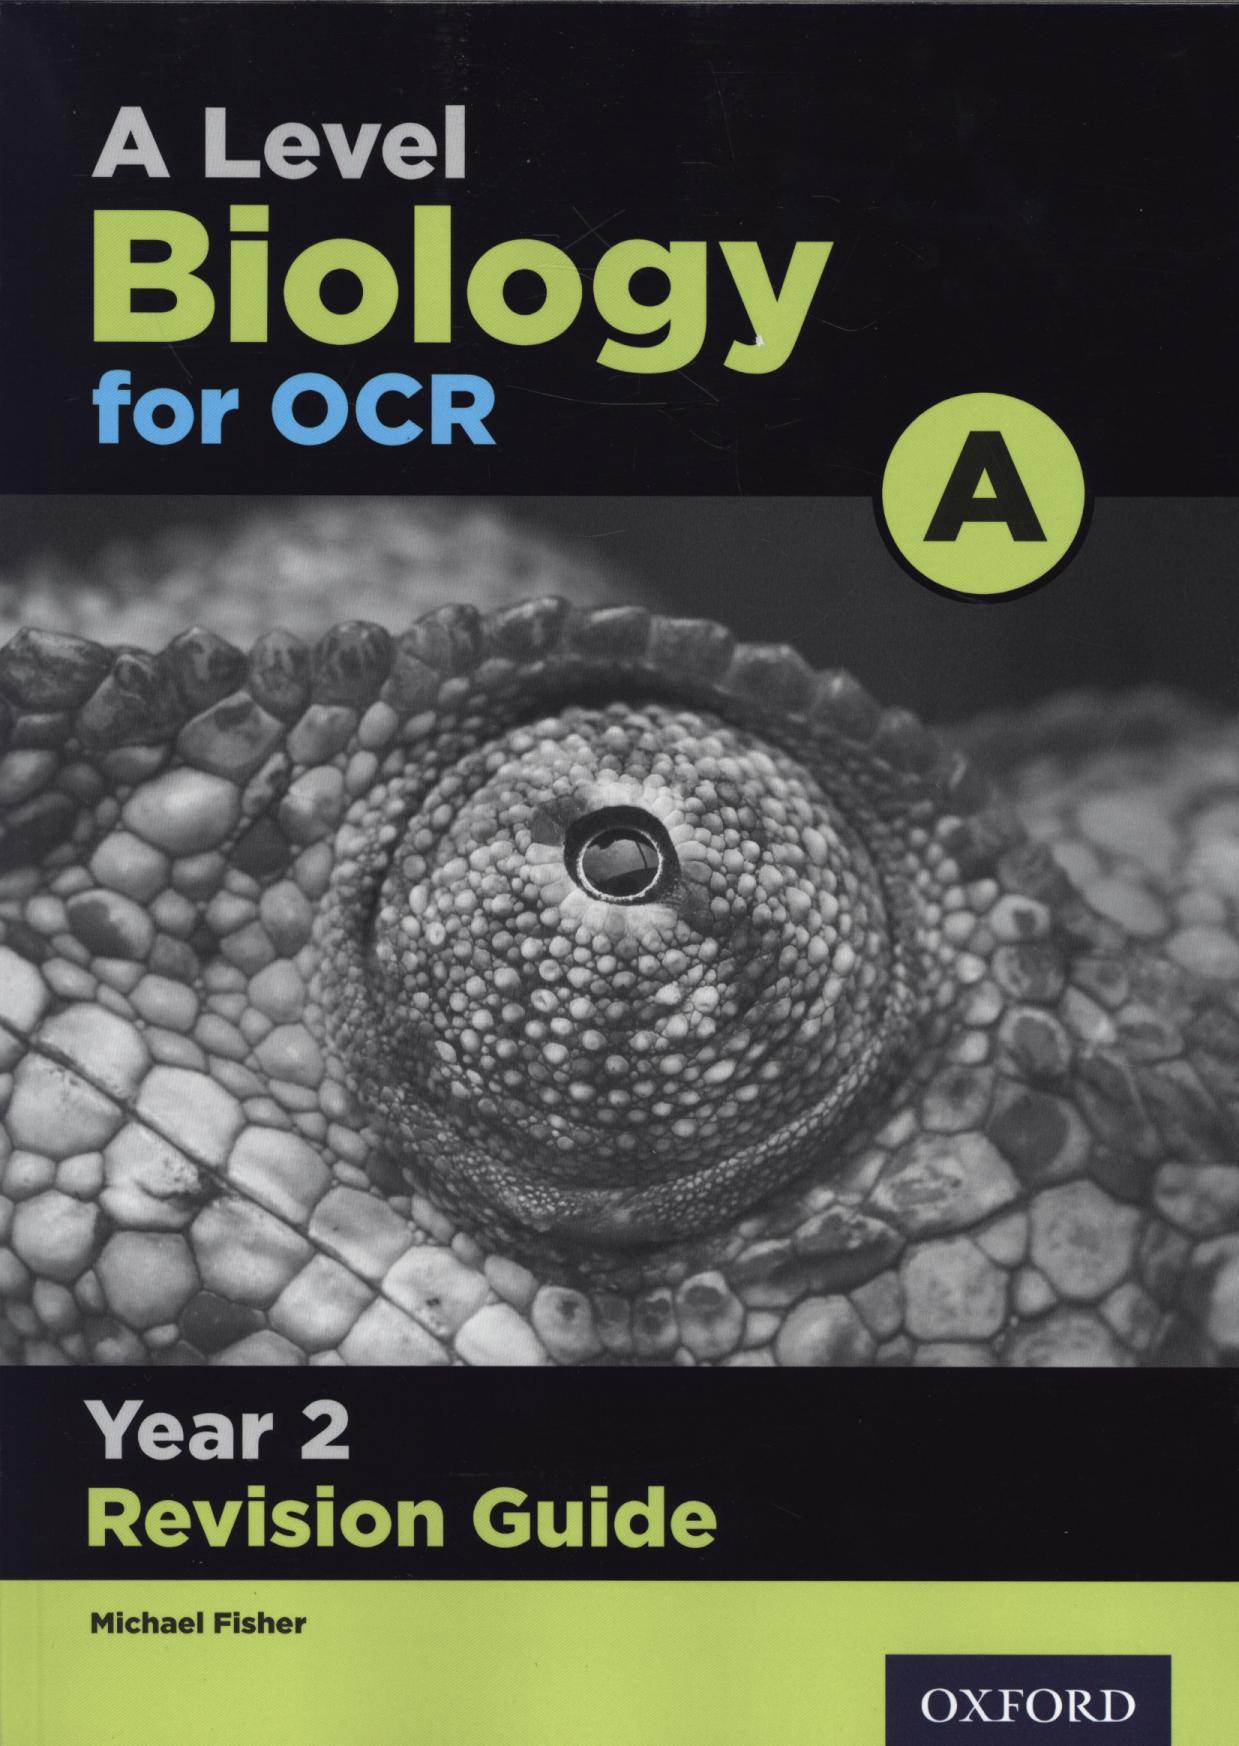 OCR A Level Biology A Year 2 Revision Guide